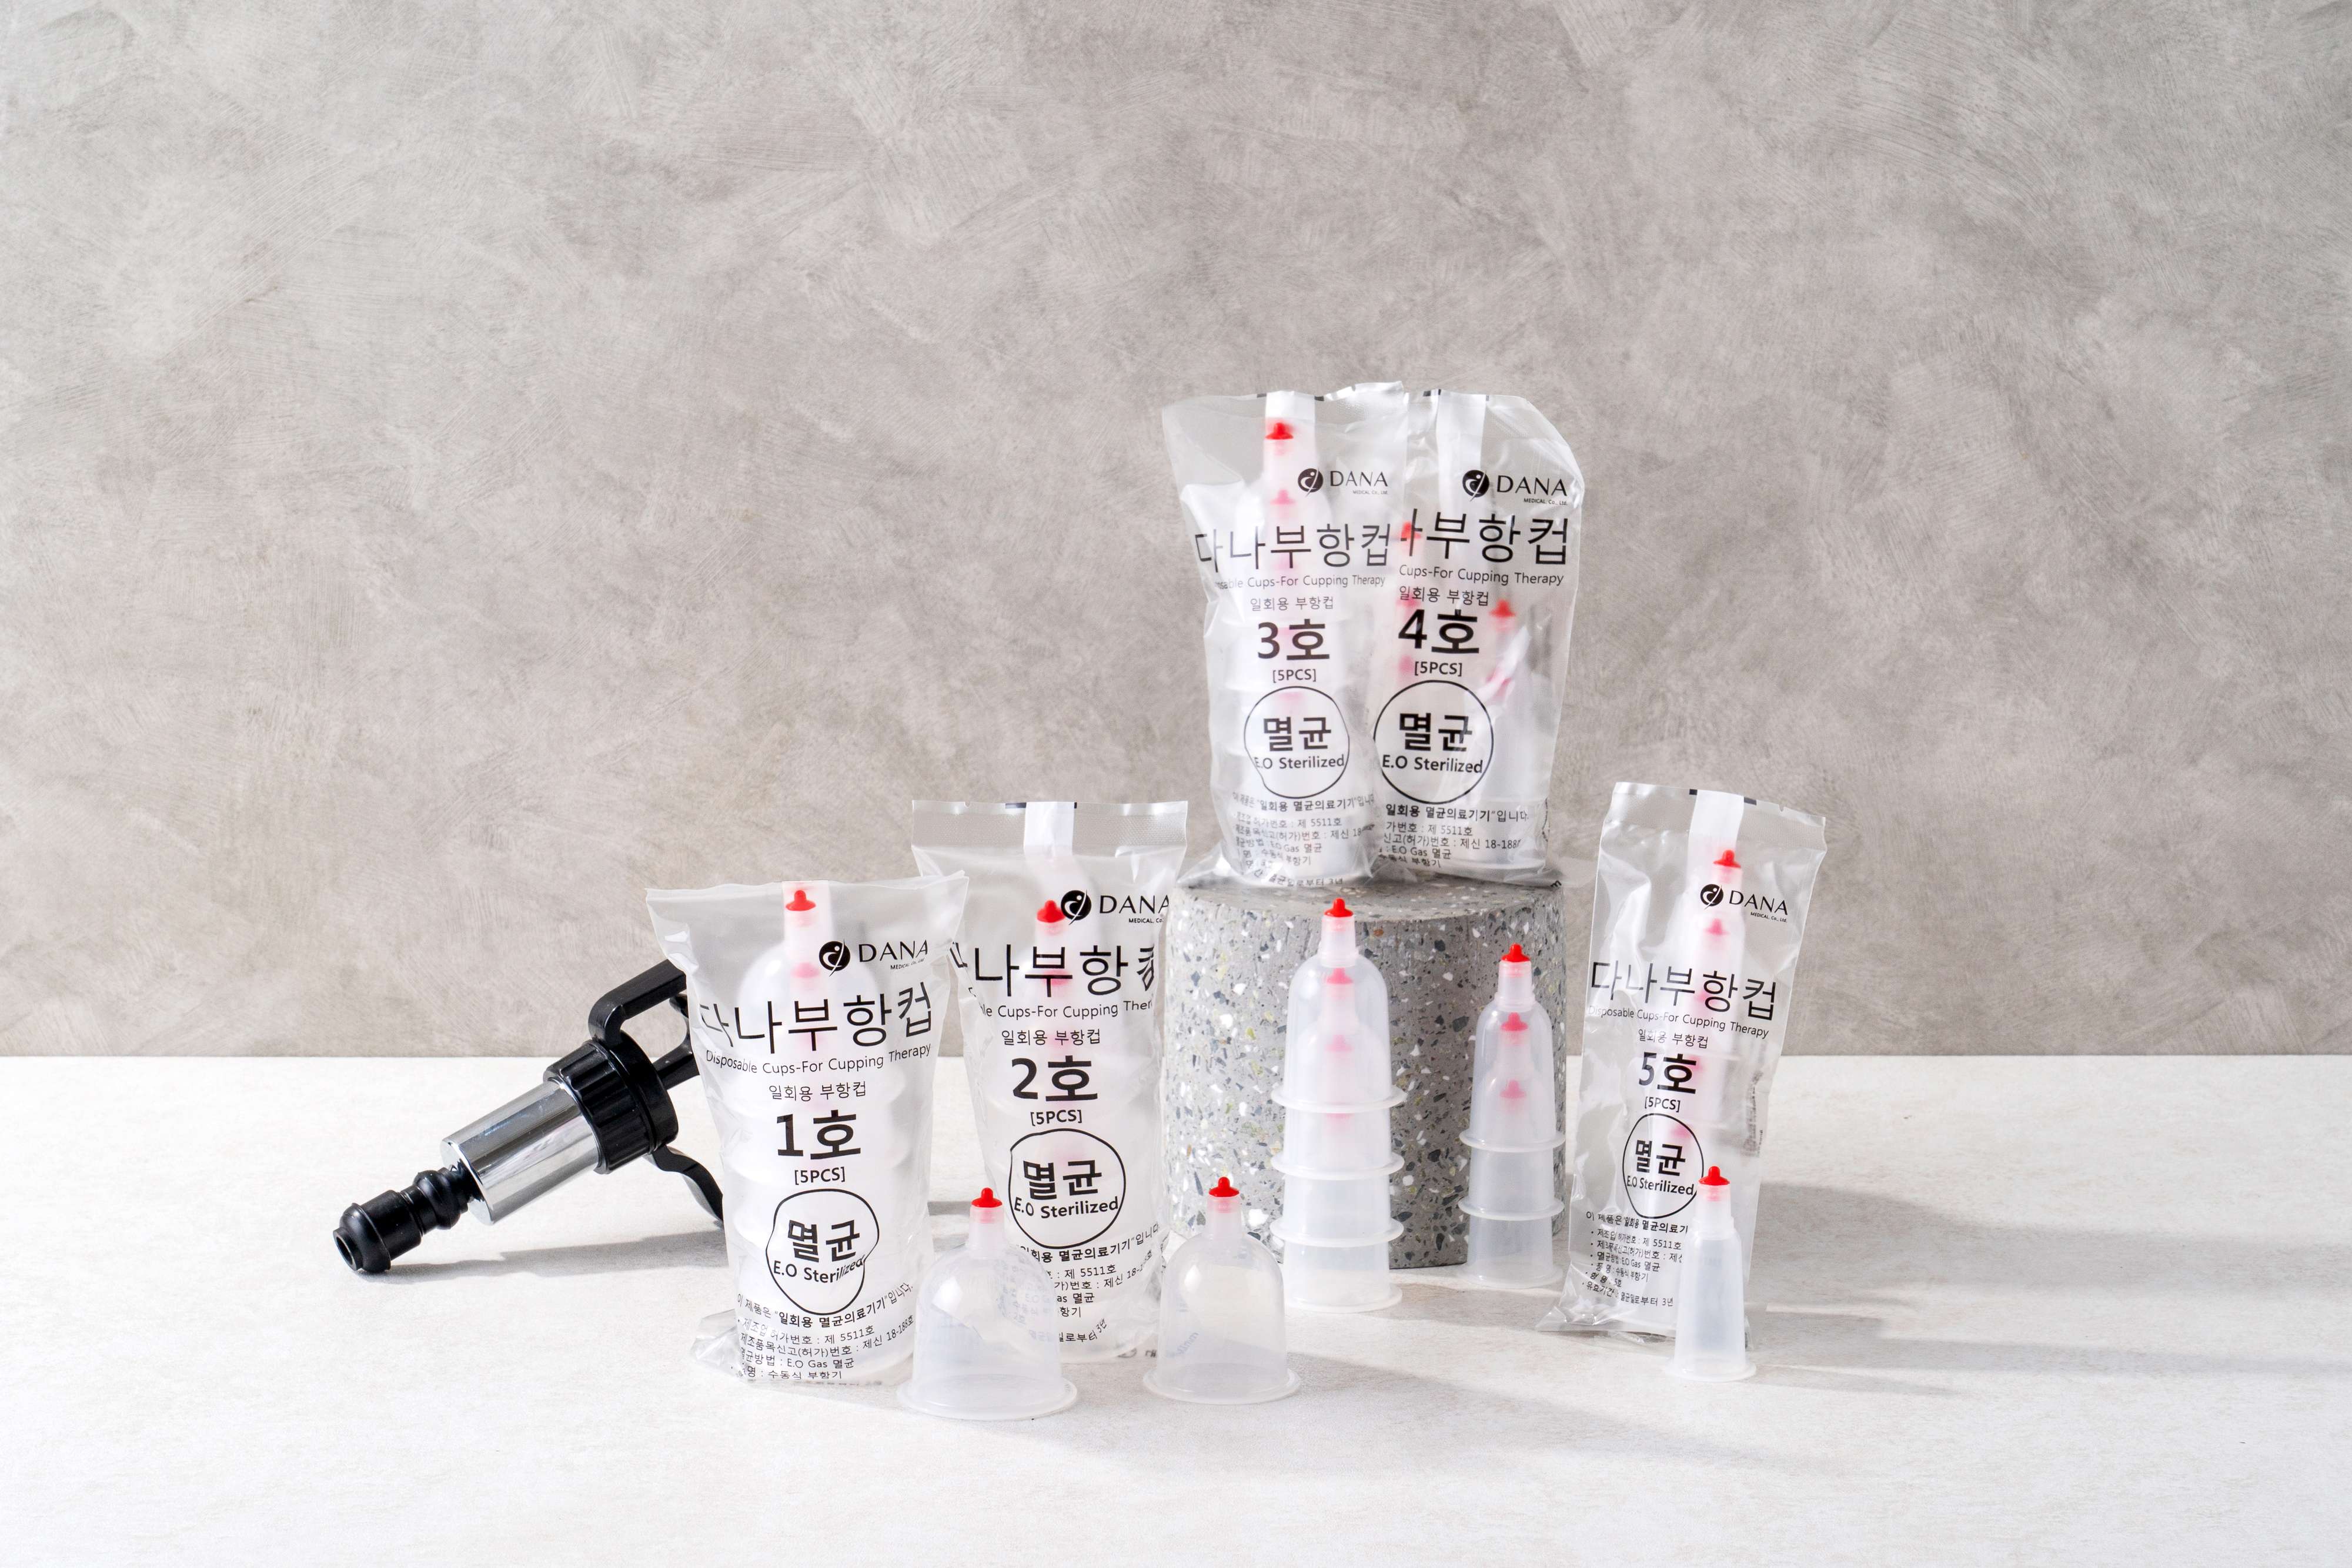 Dana Cupping cups (Disposable cupping cups for single use)